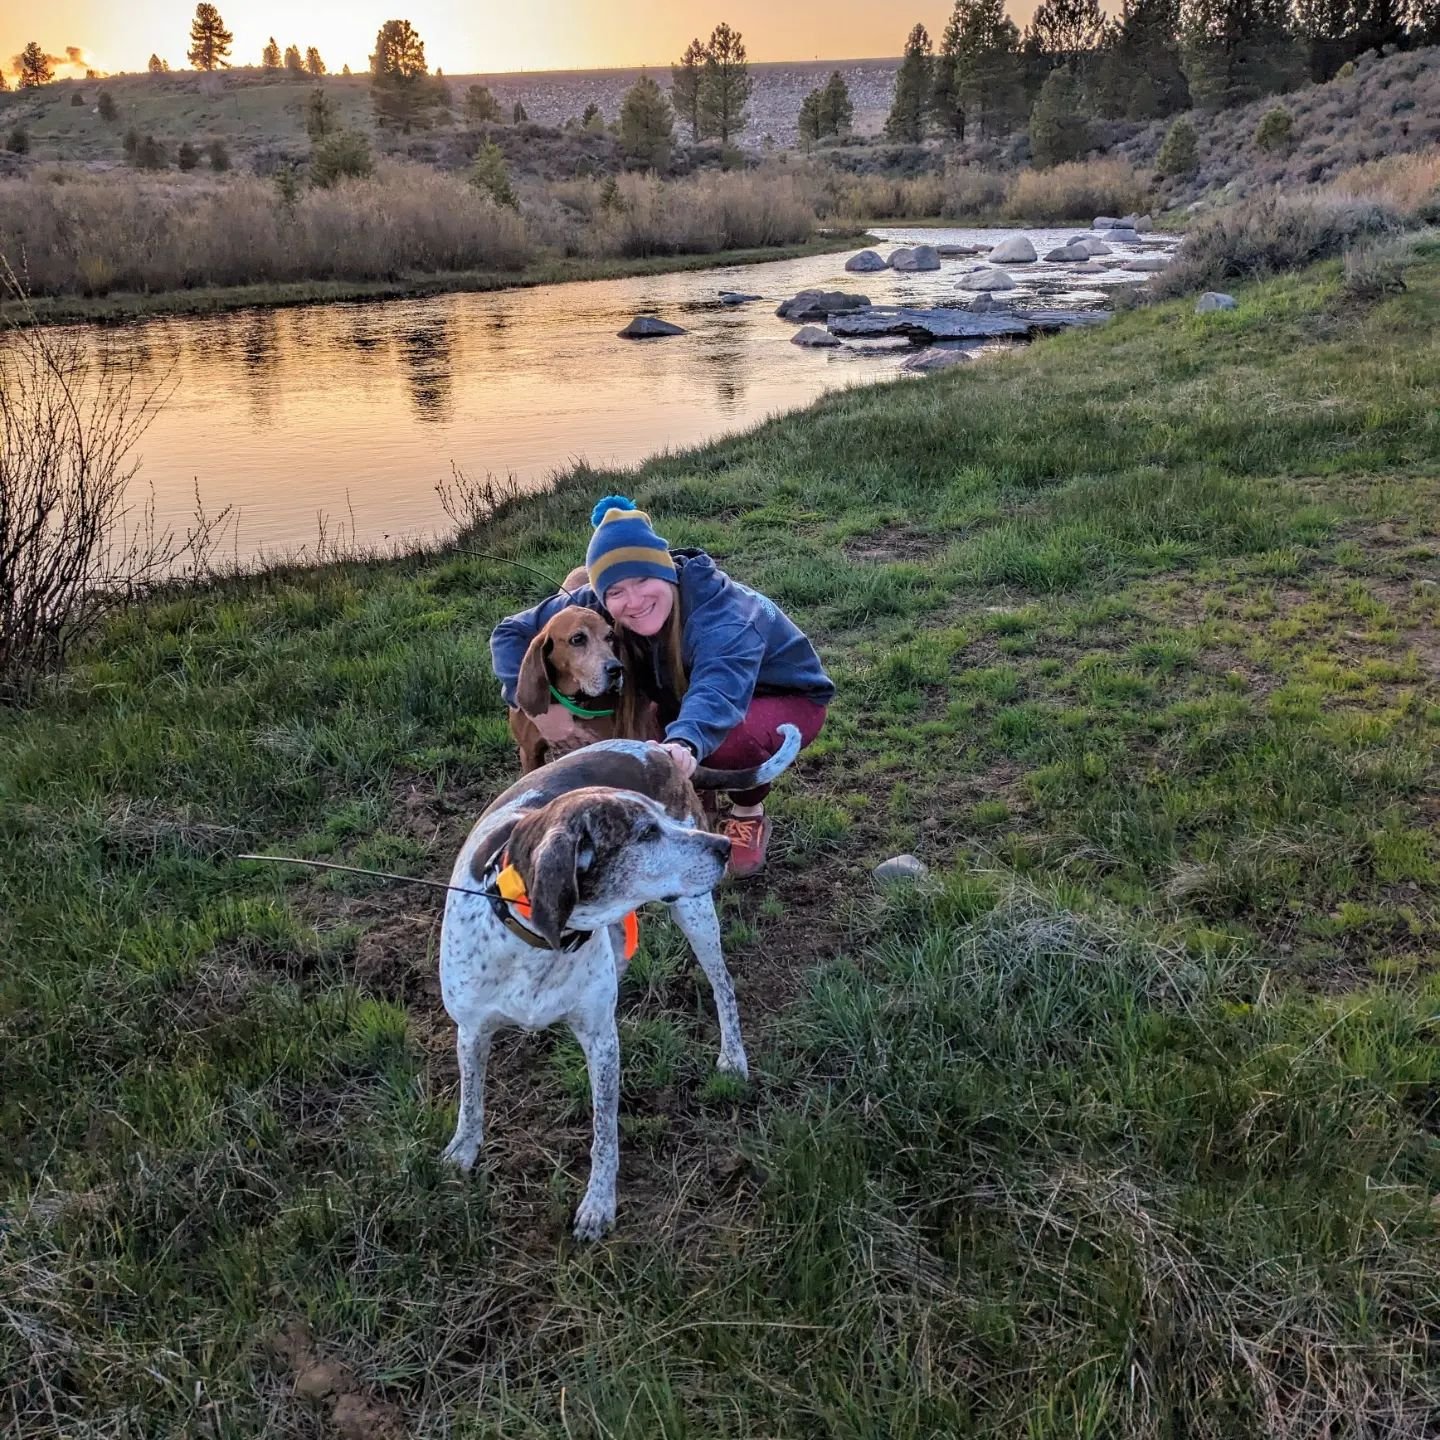 Spring sunset walk with the girls #coonhounds 
frogs 🐸 and birds 🐦&zwj;⬛🦉singing 🎶 water flowing 🌊 
Happy to welcome spring to Tahoe 😊 

#coonhoundsofinstagram #redbonecoonhound #bluetickcoonhound #bluetickplott #naturewalks #springinthesierras